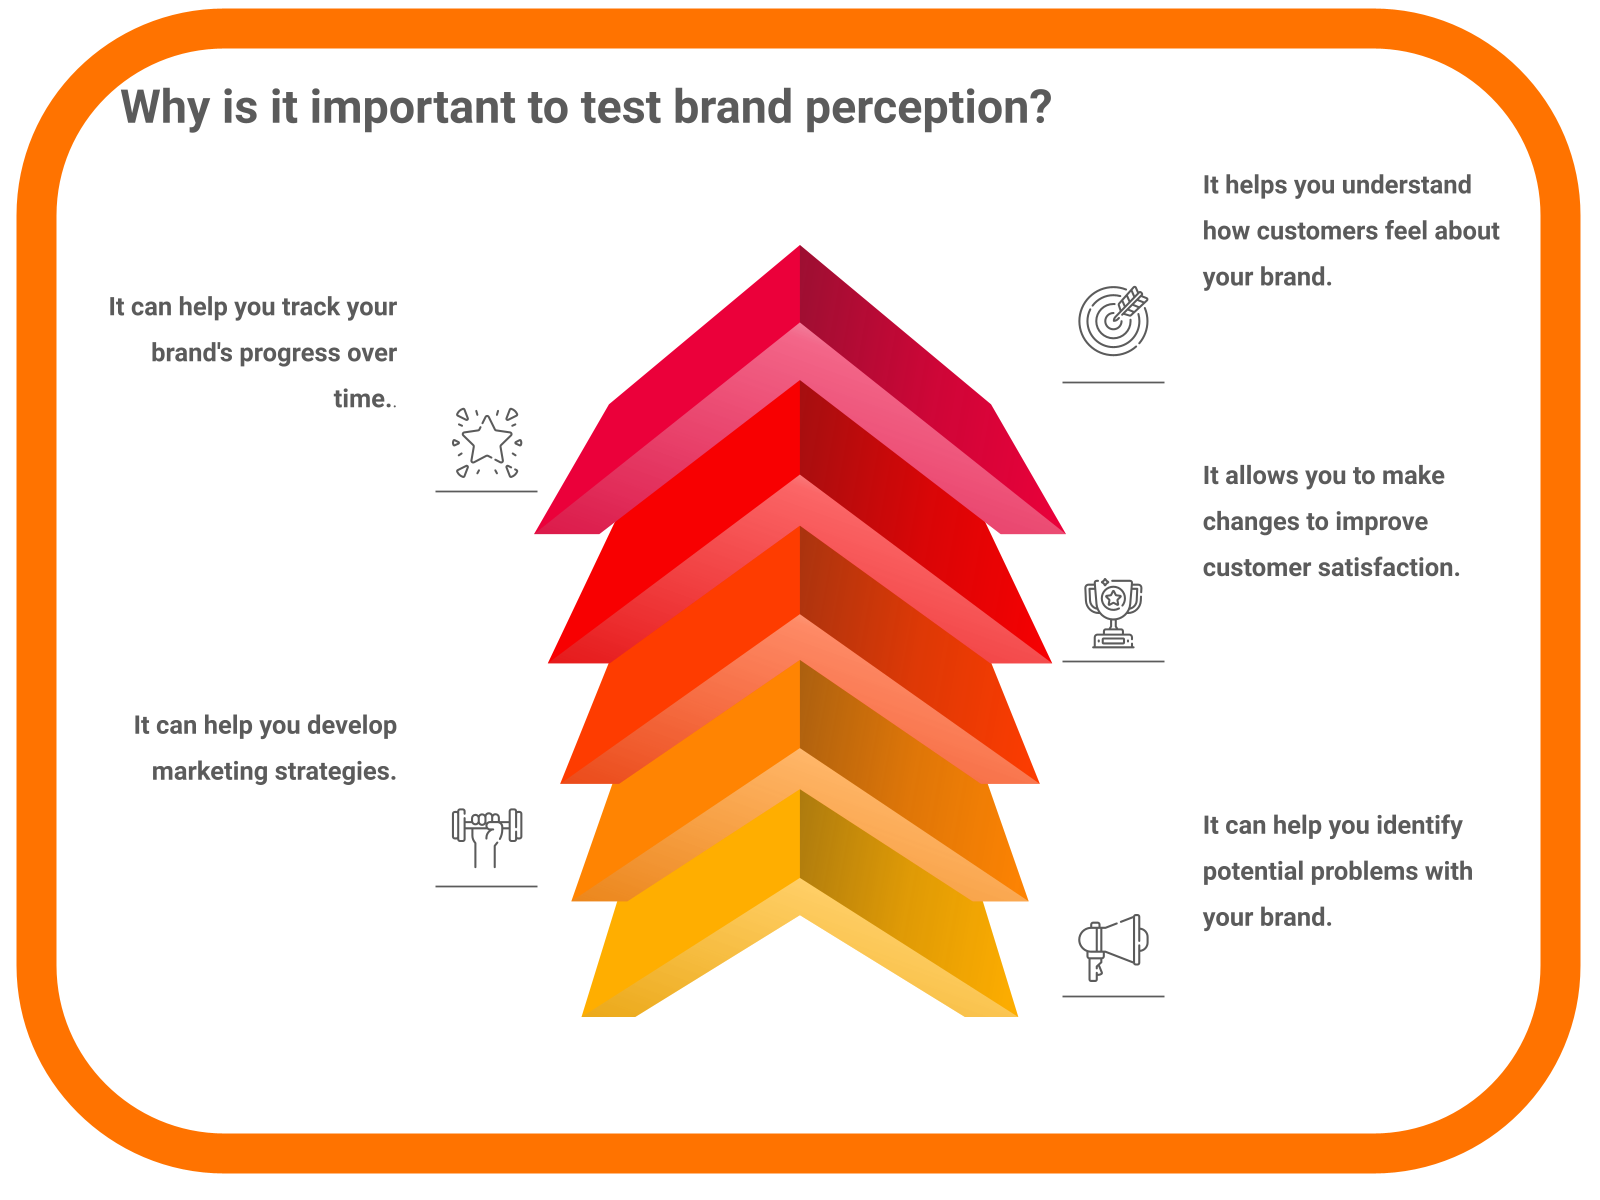 Why is it important to test brand perception?